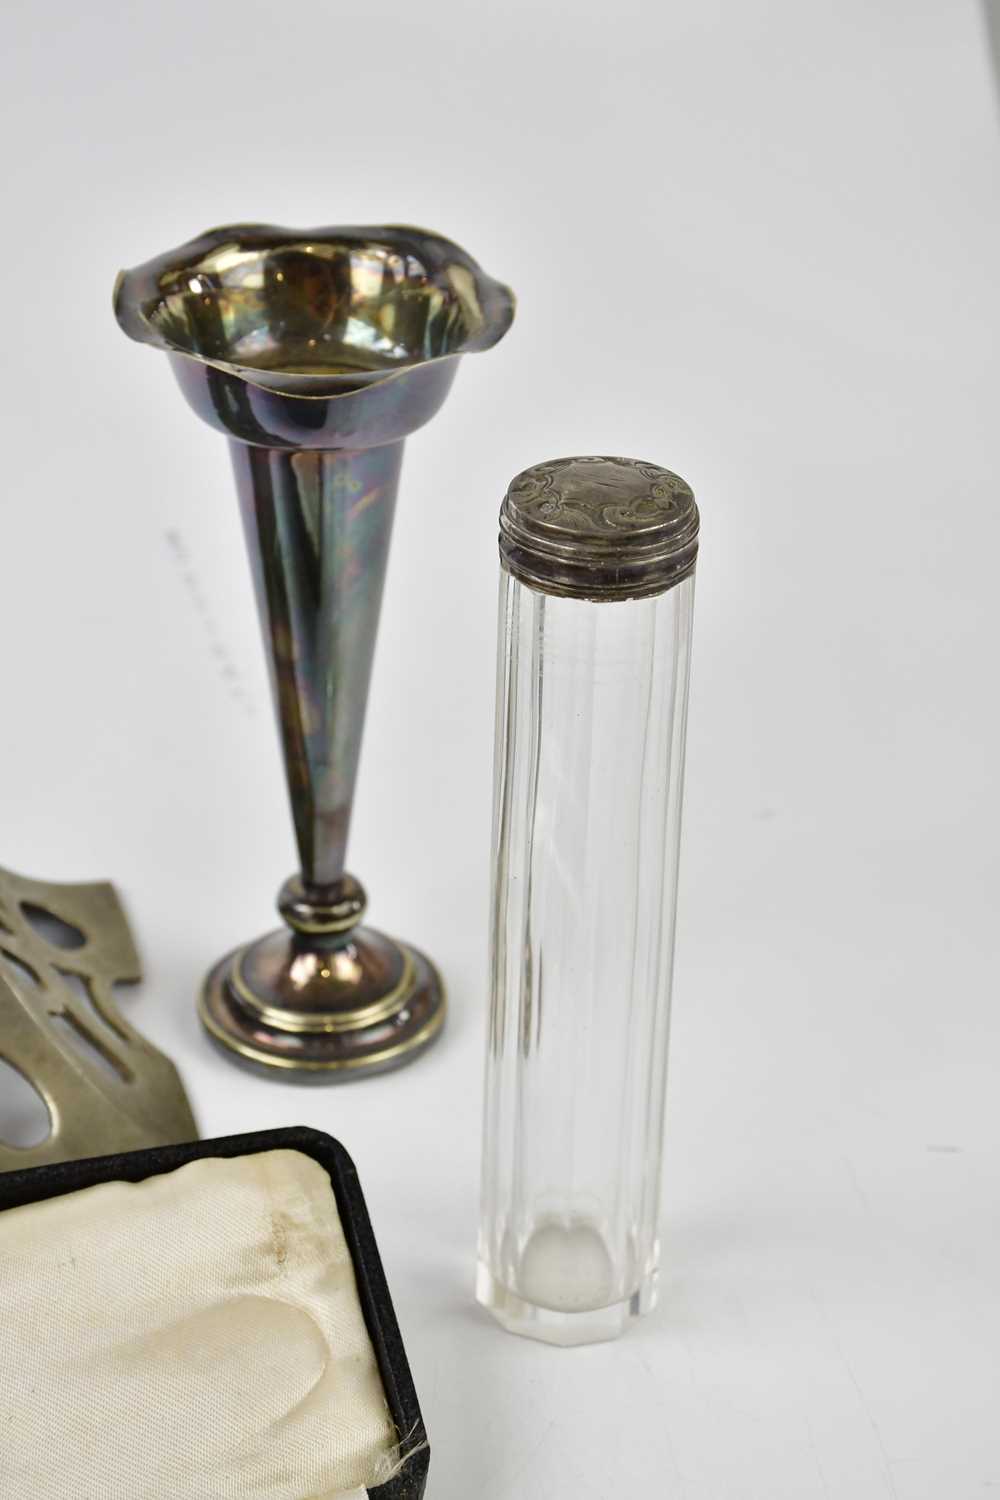 A decorative pair of modern Art Nouveau inspired candlesticks, a cased pair of hallmarked silver - Image 4 of 6